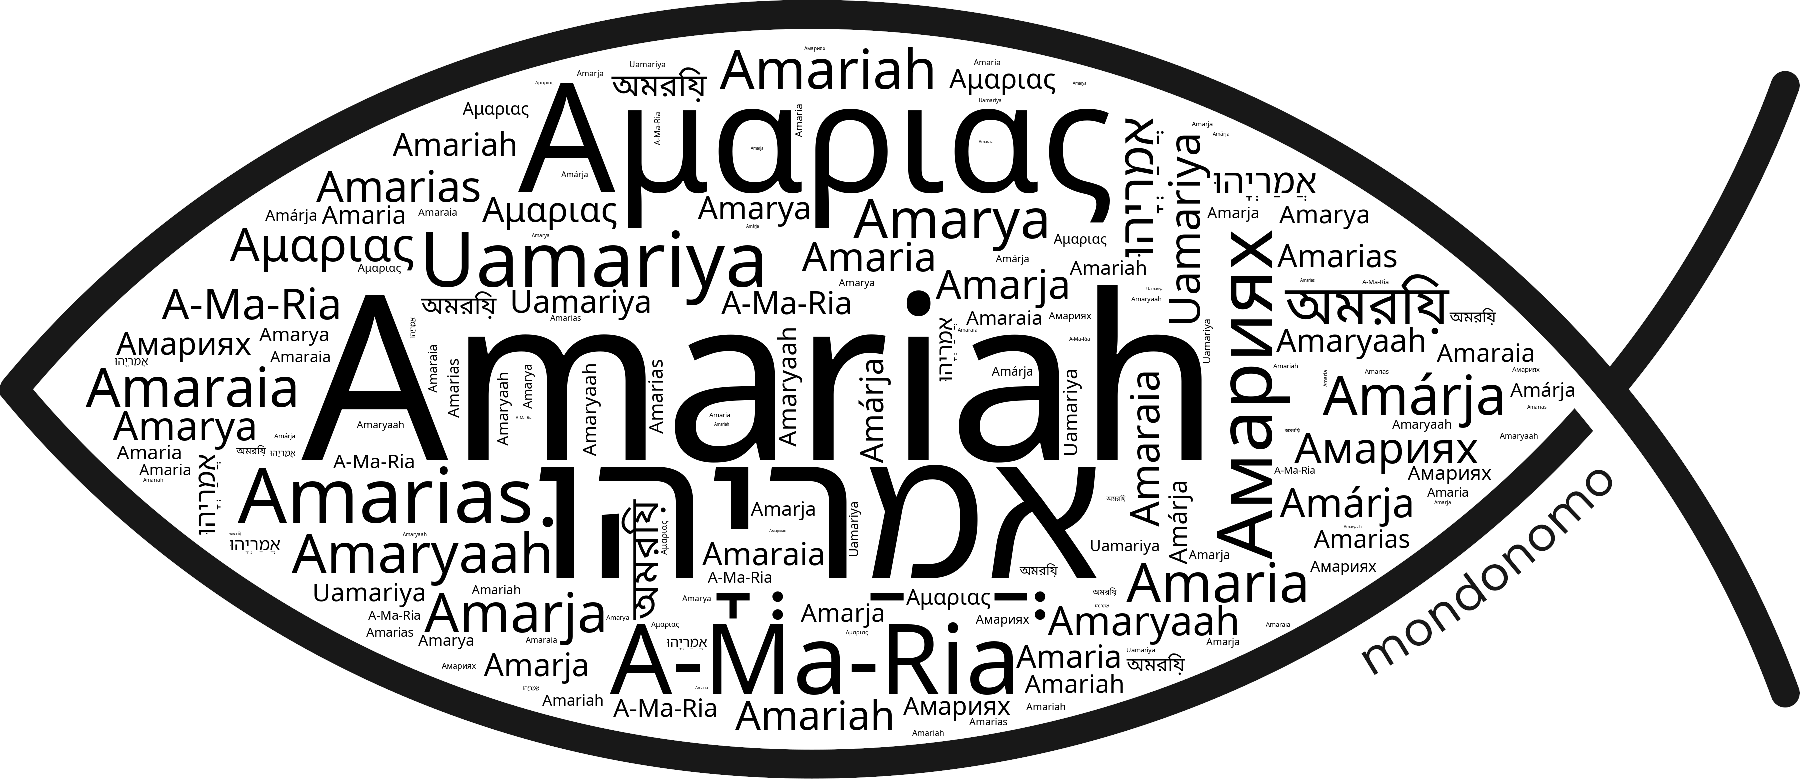 Name Amariah in the world's Bibles